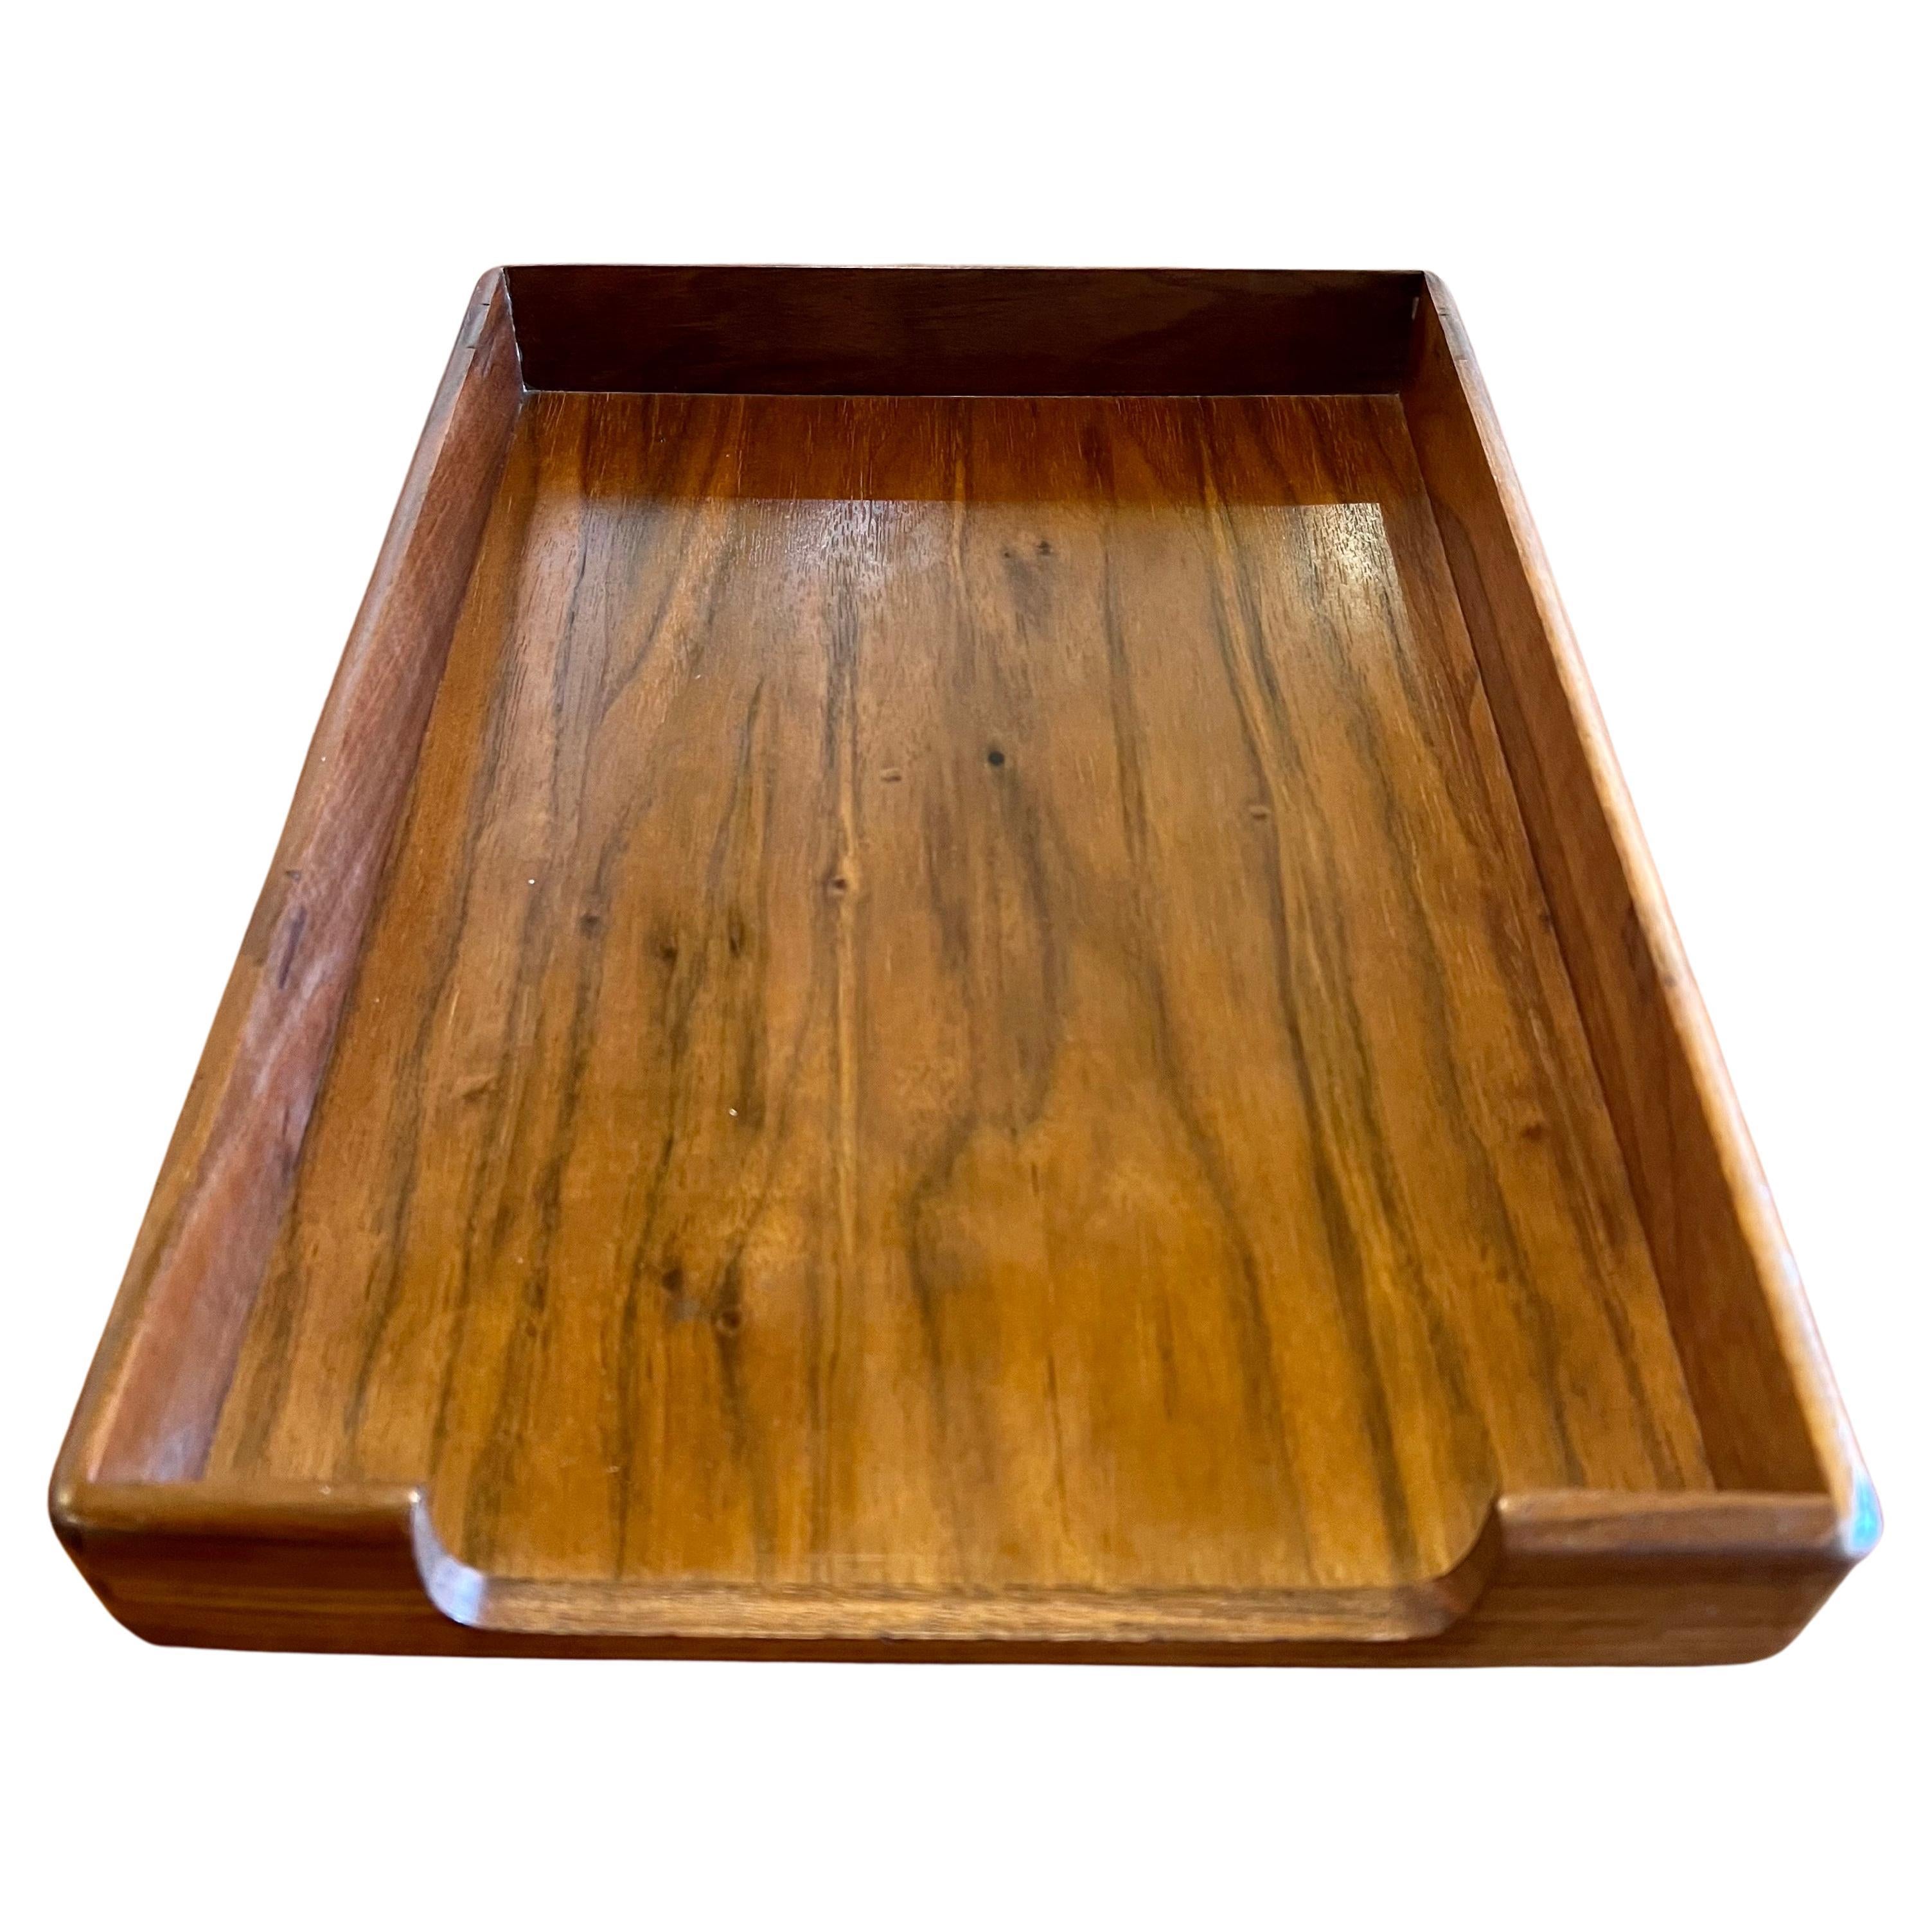 Incredible midcentury letter tray in solid walnut. Great lines and construction rounded corners with dove tail joinery.